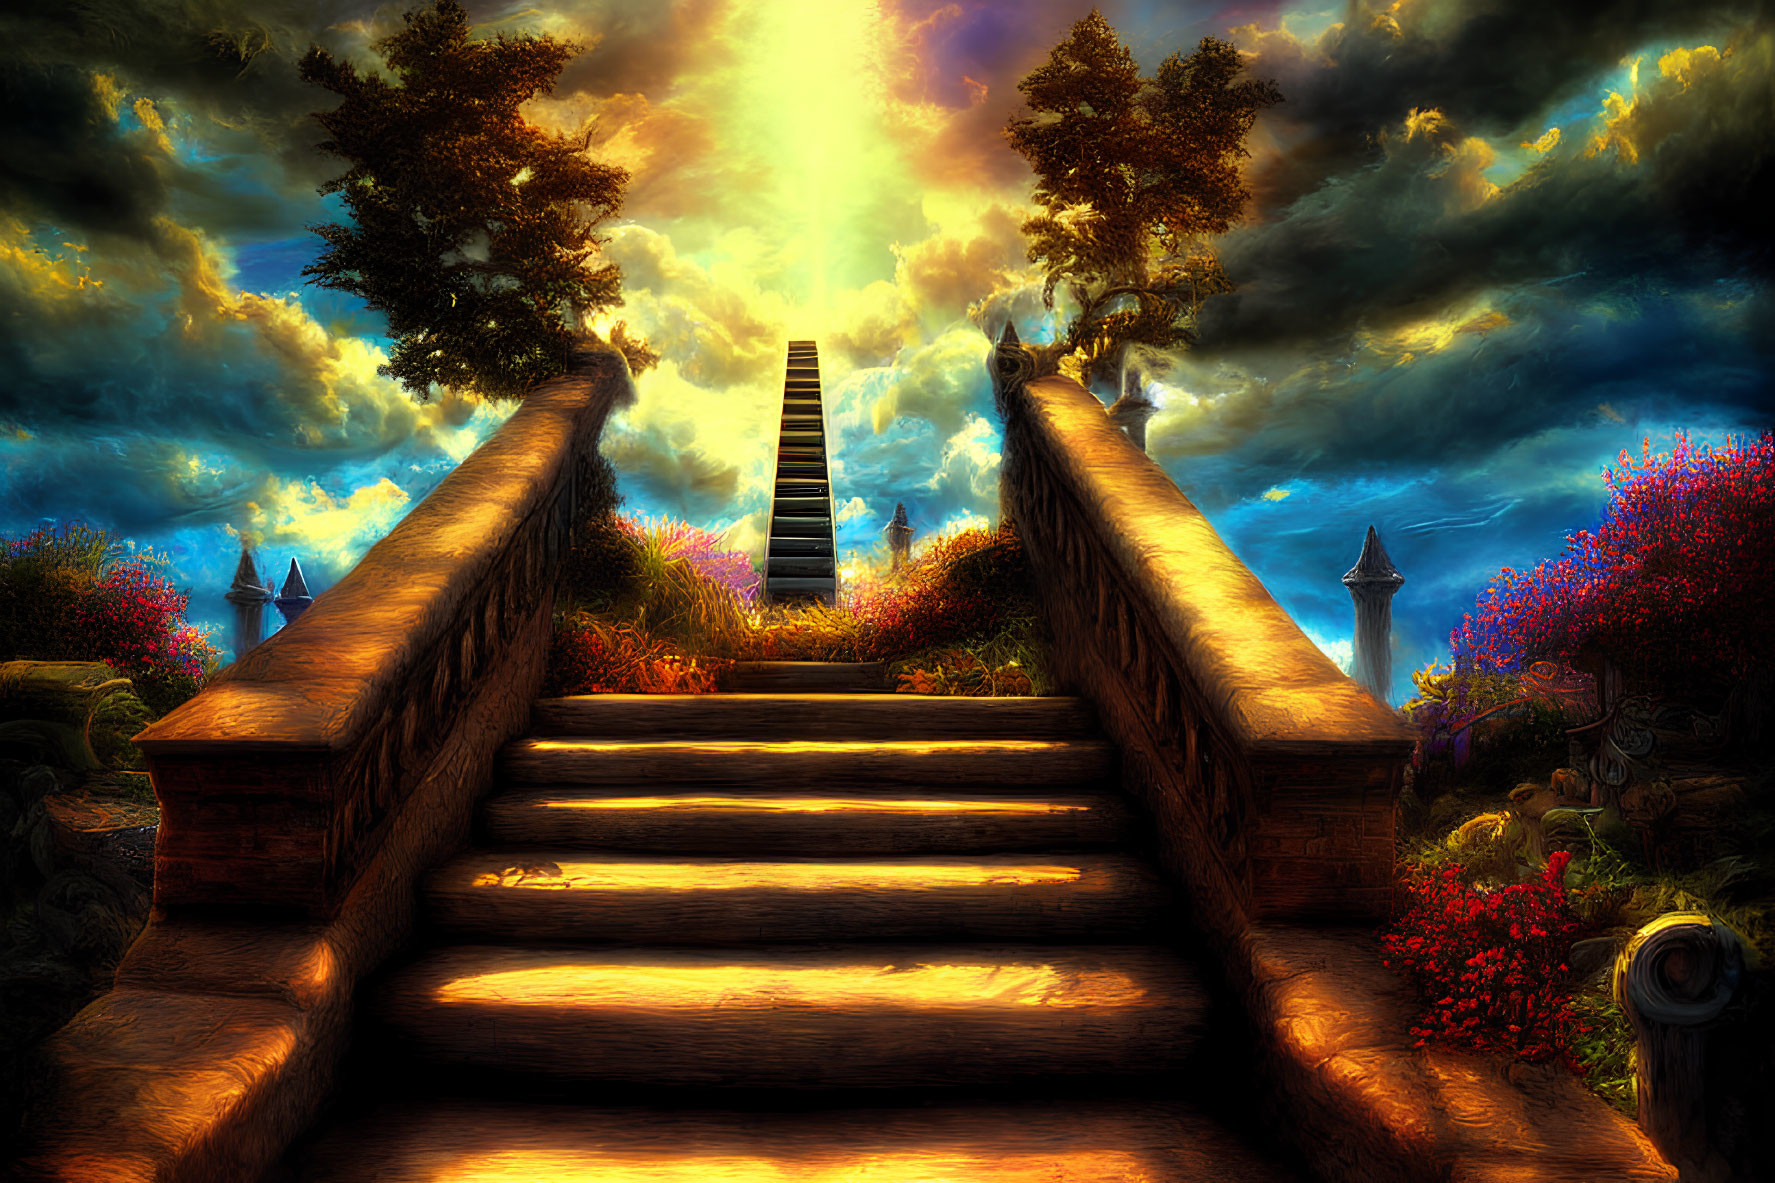 Colorful Stairway Ascends to Heavenly Light Amid Dreamlike Landscape